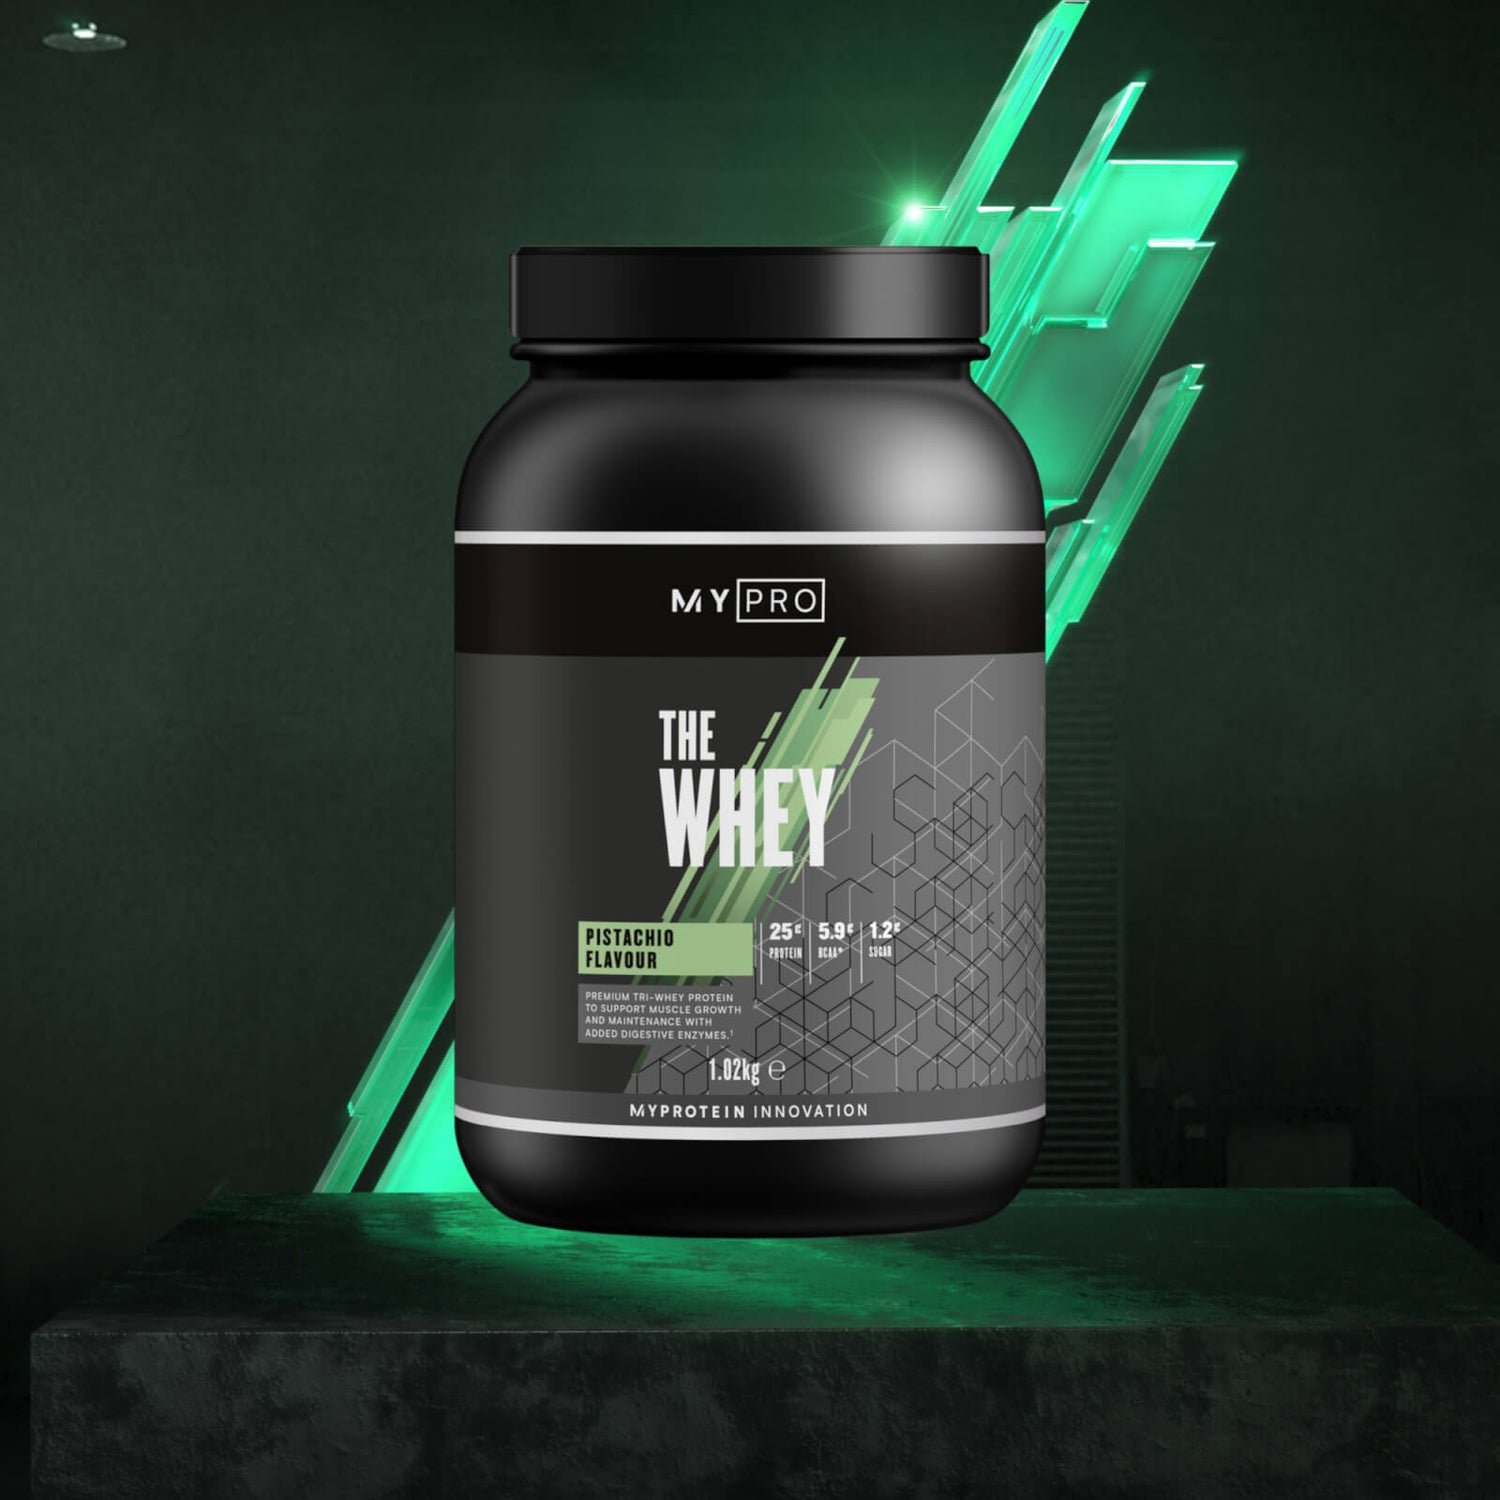 THE Whey – pistaasin makuinen